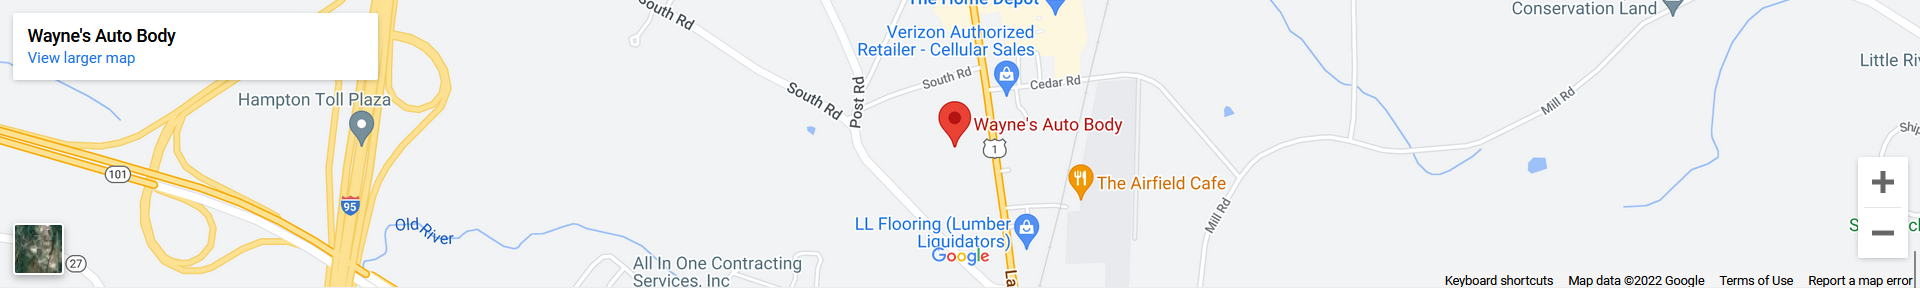 An online map of Wayne’s Auto Body’s location